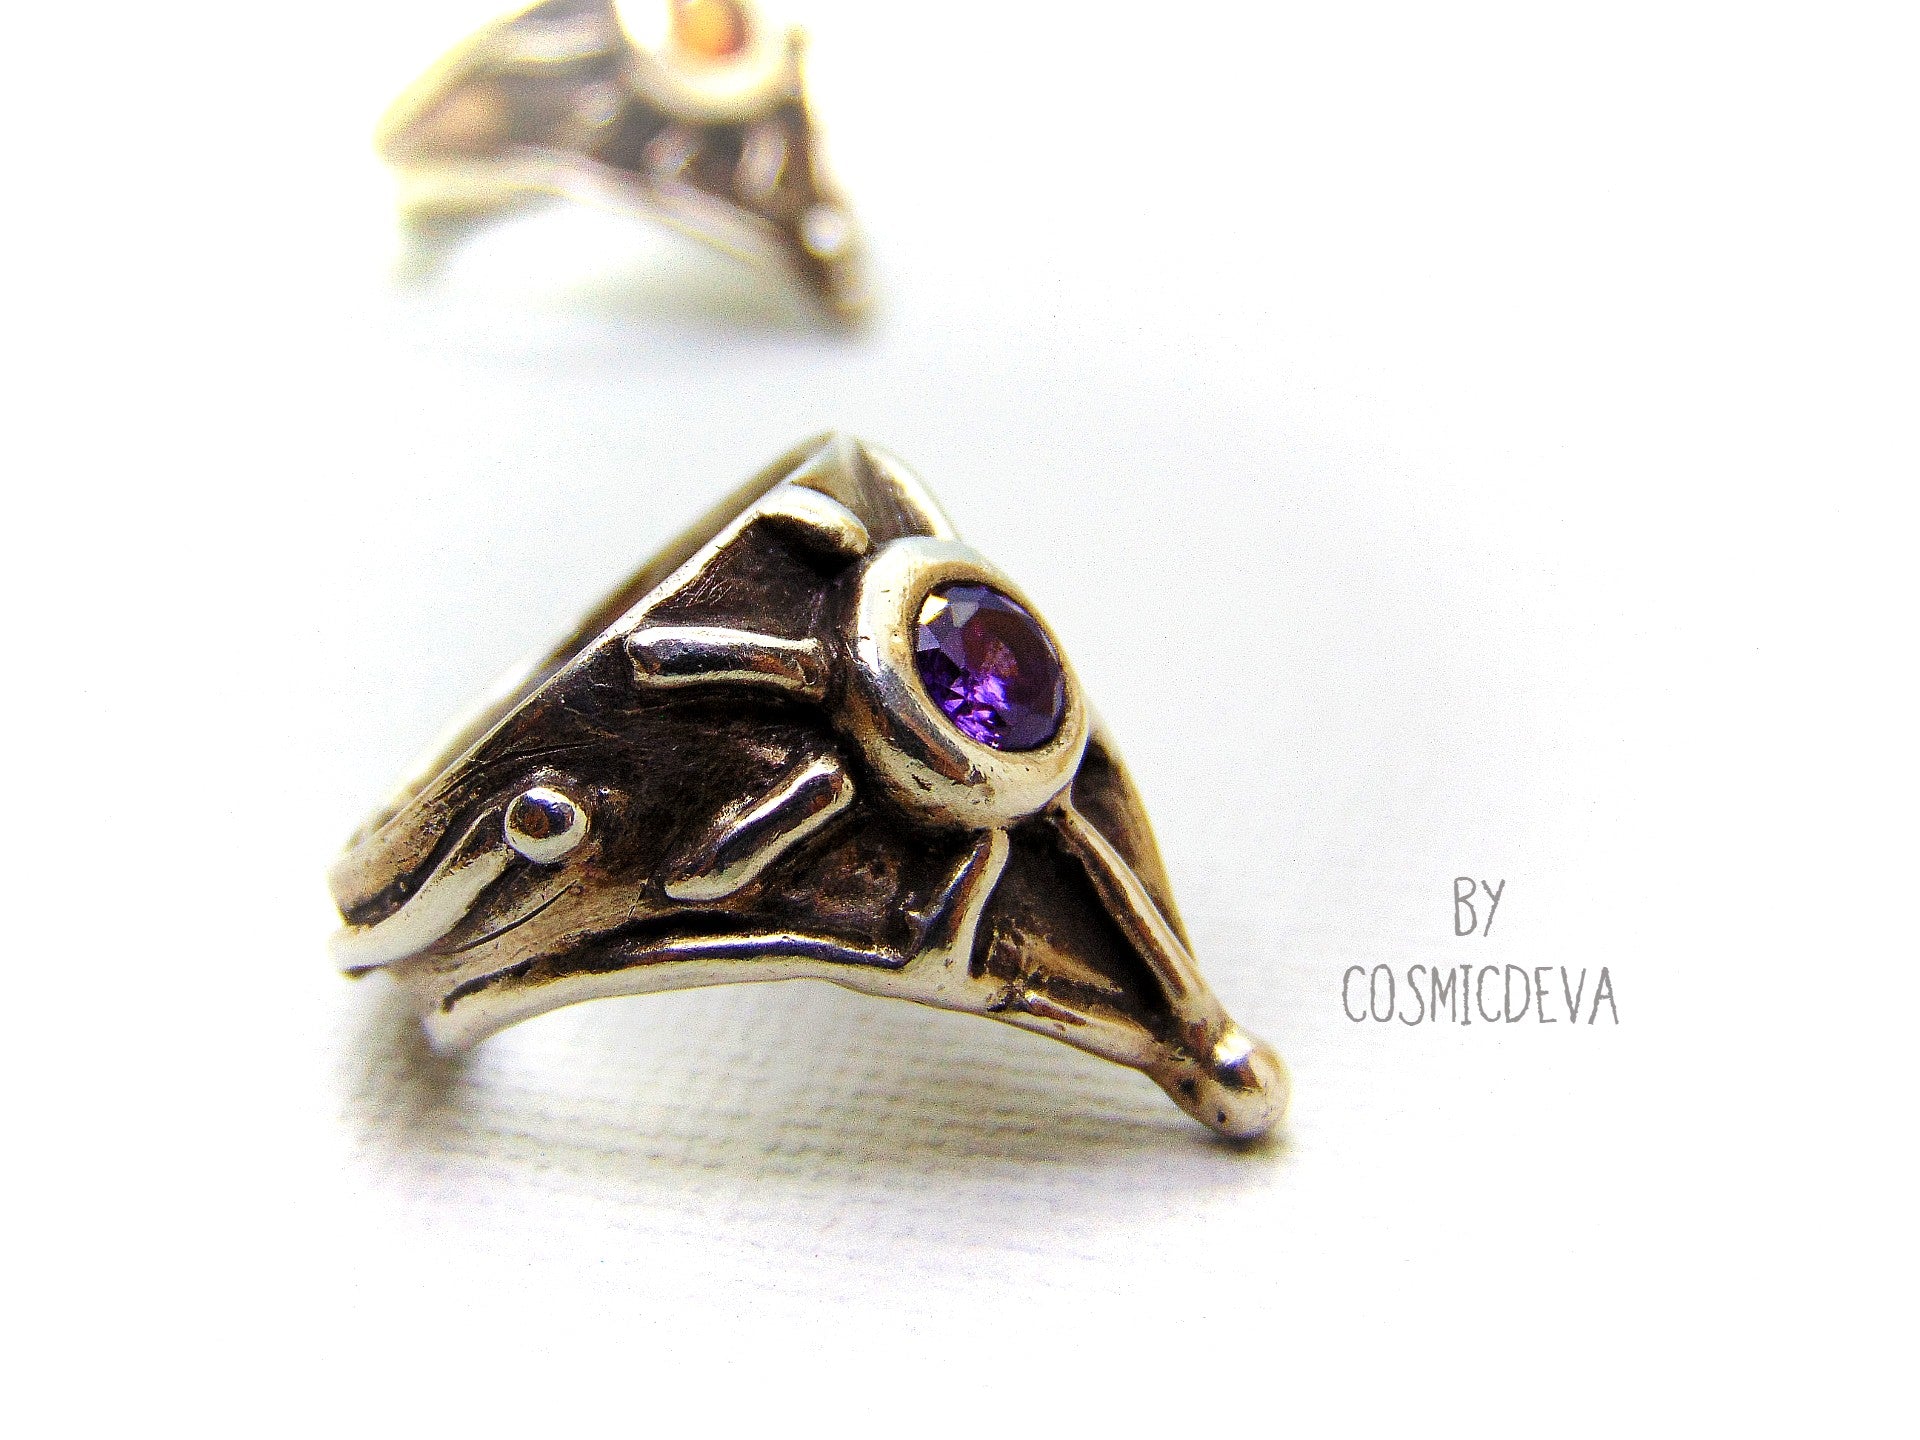 Medieval Shield Triangle Fine Silver Amethyst US size 7 Ring. Unique handcrafted medieval triangle shaped shield silver ring with a 5 mm round amethyst stone. This Ring is made of solid .999 fine silver and hallmarked as it. The ring was oxidized to give it a vintage antique design. - CosmicDeva